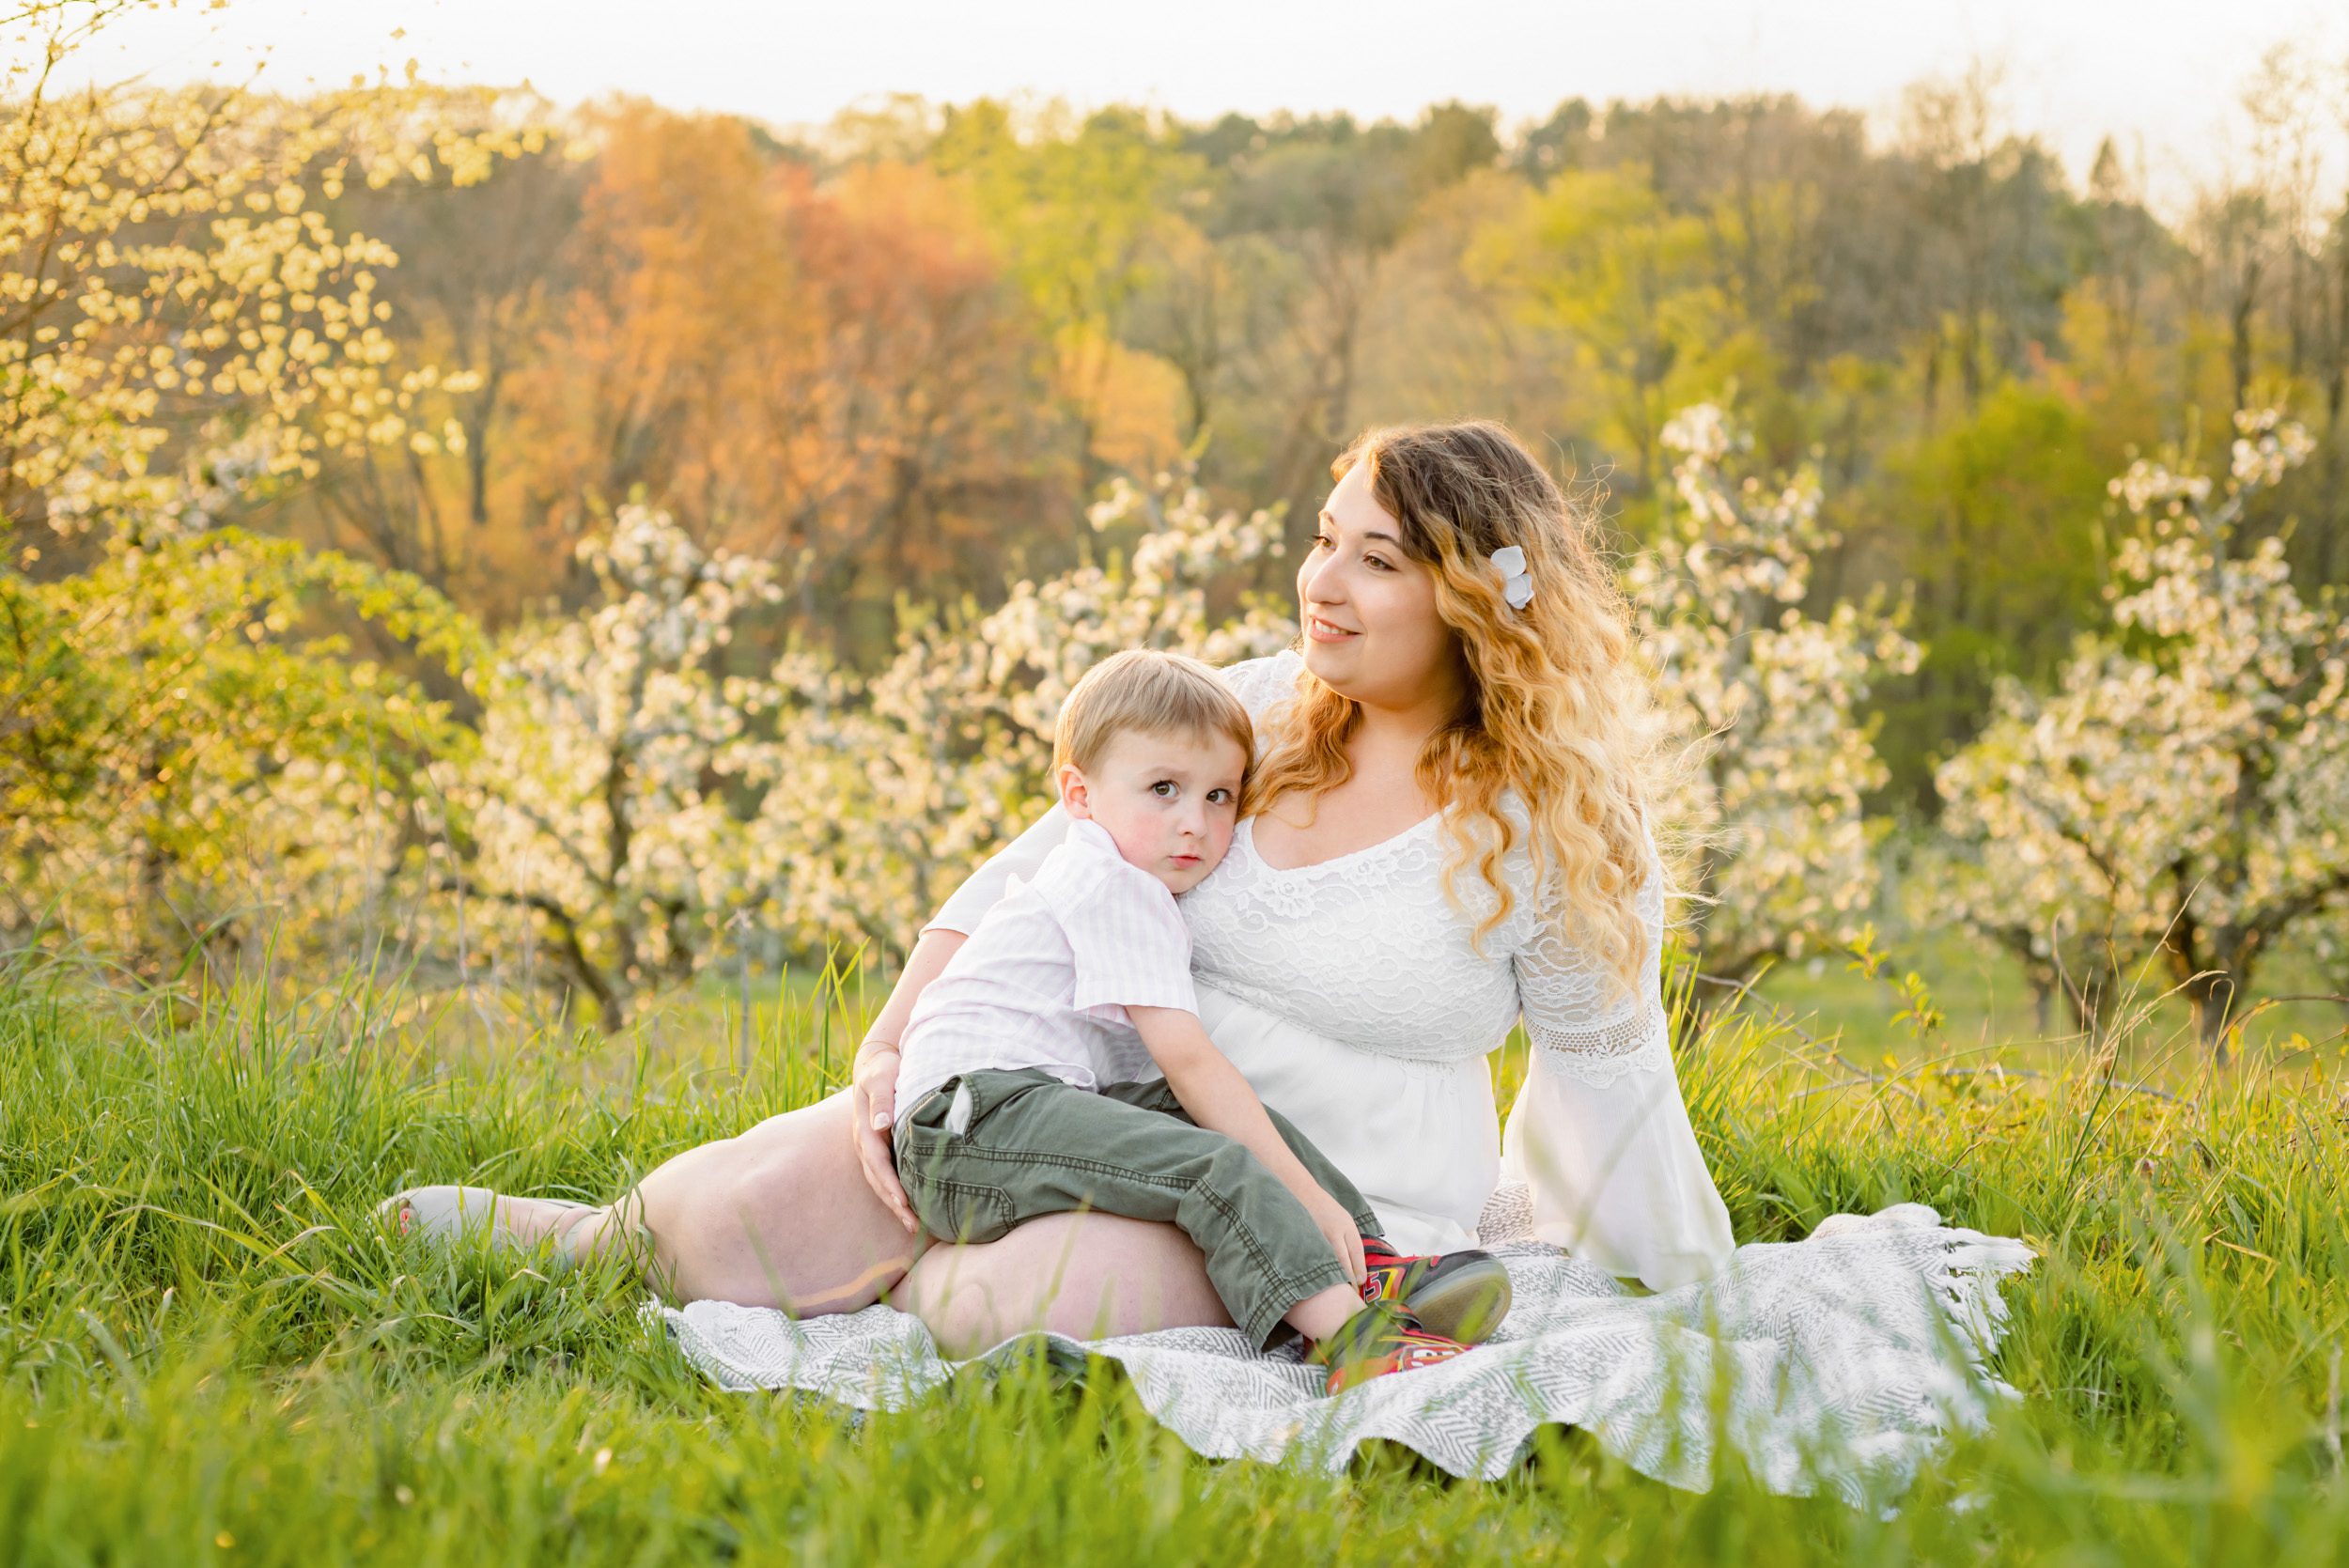 A little boy snuggling with his mom in an orchard full of white apple blossoms in bloom during a family photoshoot